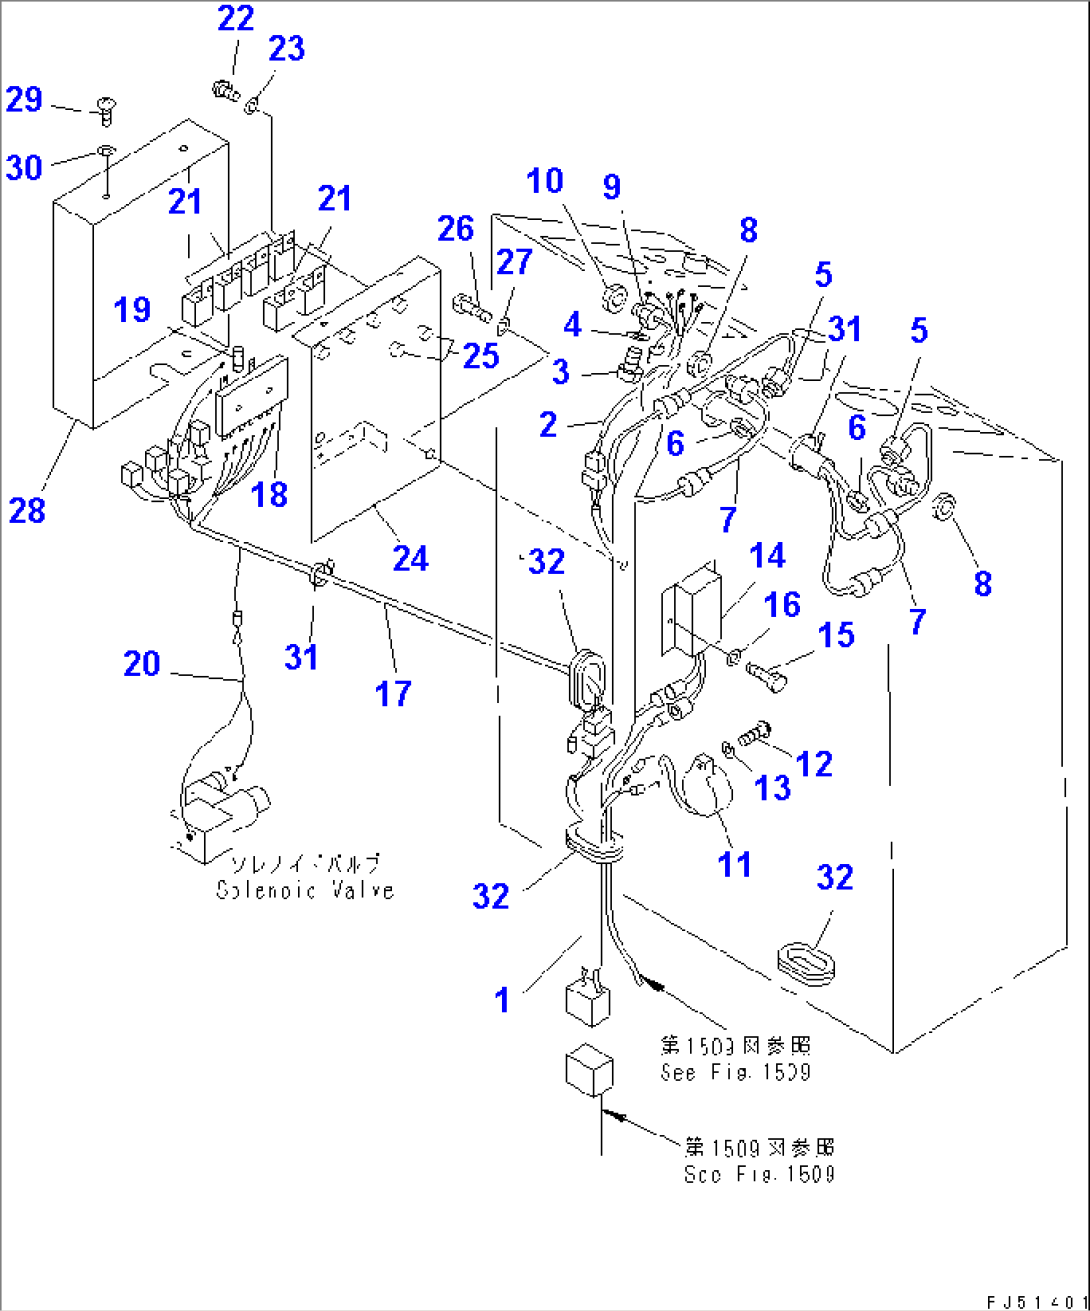 ELECTRICAL SYSTEM (CENTER)(#11001-11001)